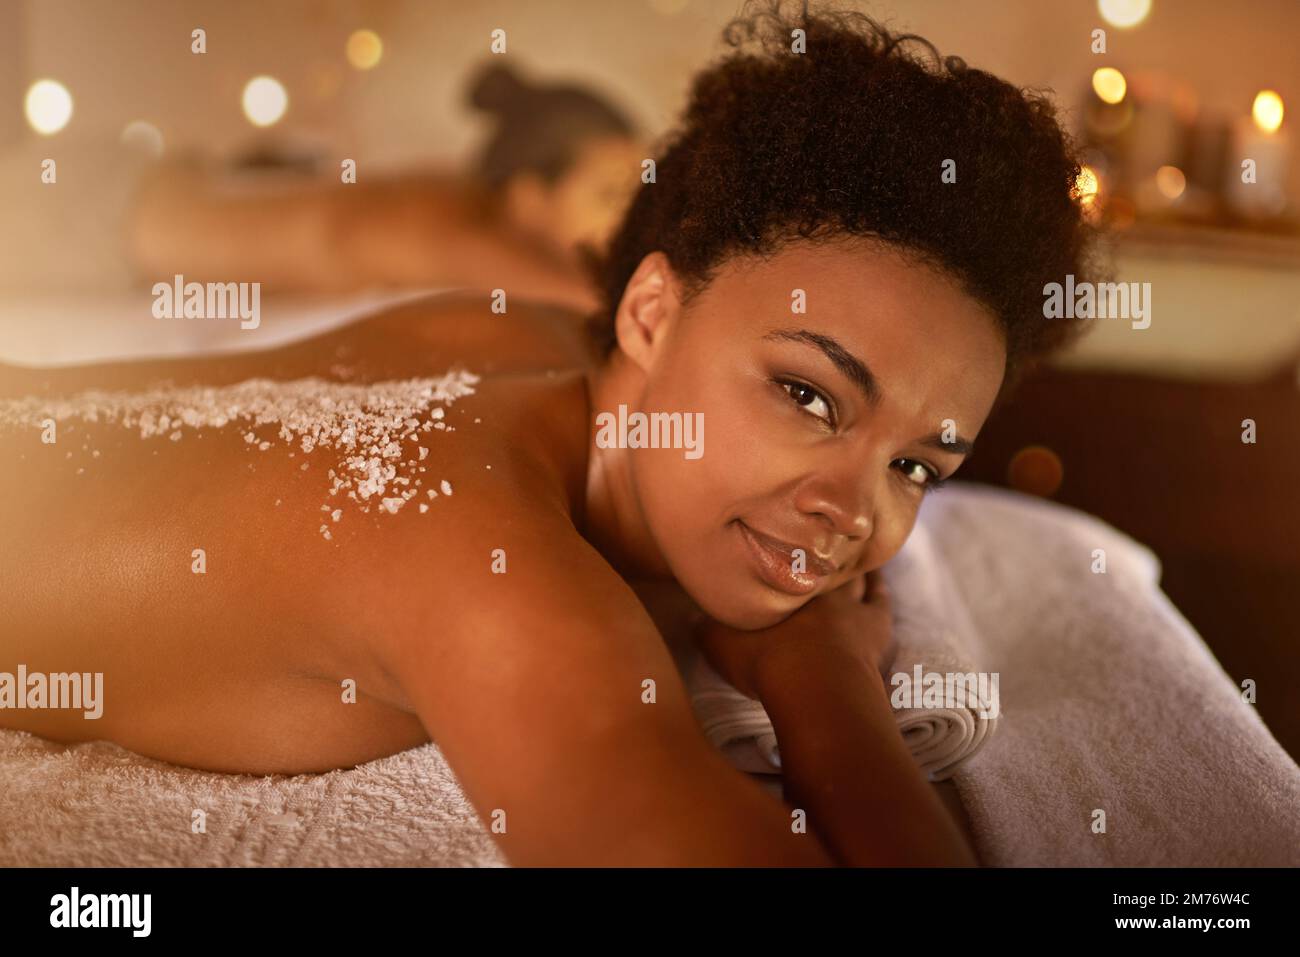 Everyday should be a spa day. a young woman enjoying a salt exfoliation treatment at a spa. Stock Photo